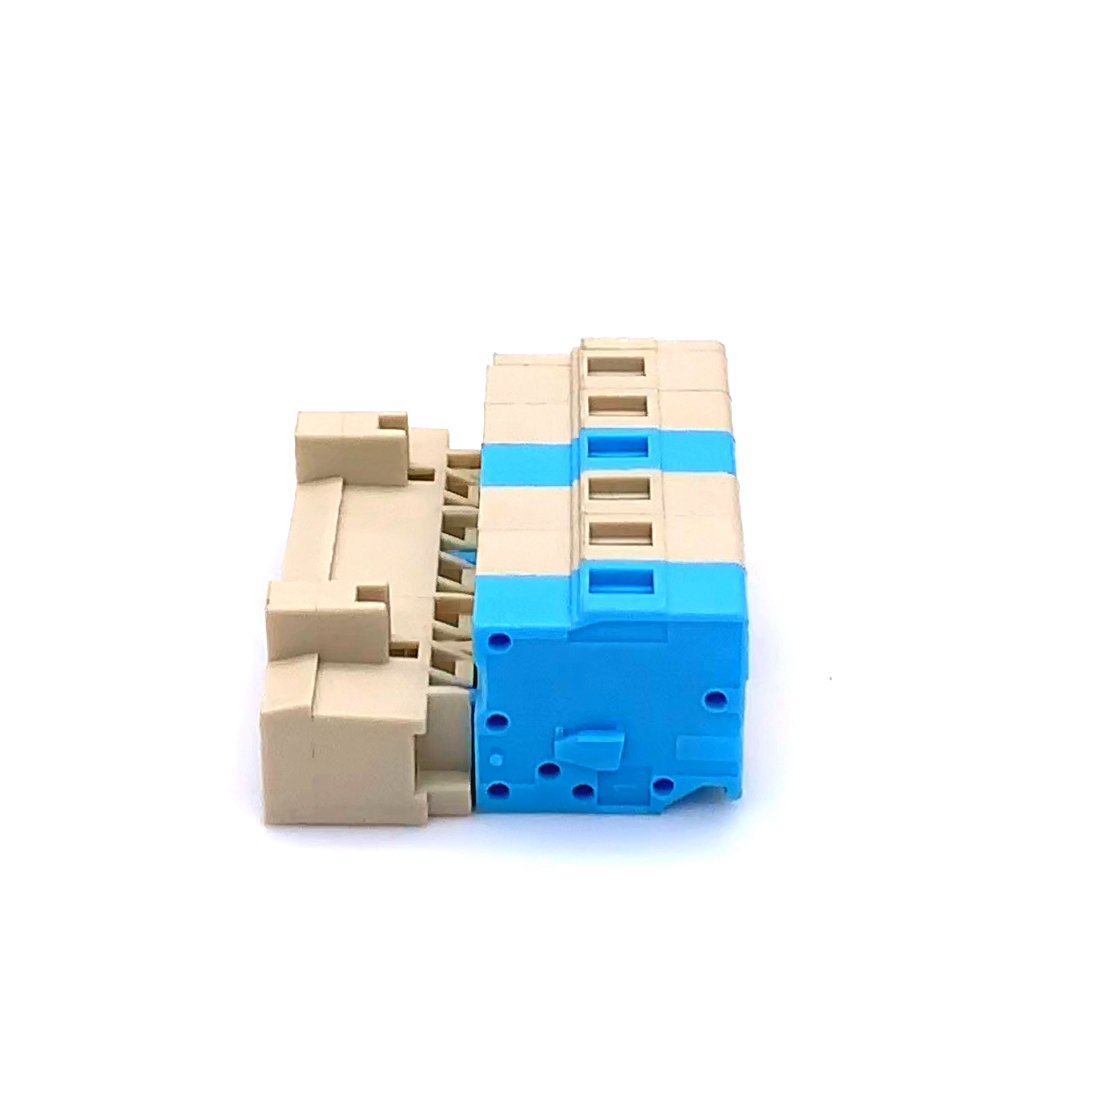 Electrical Plug Type Connector